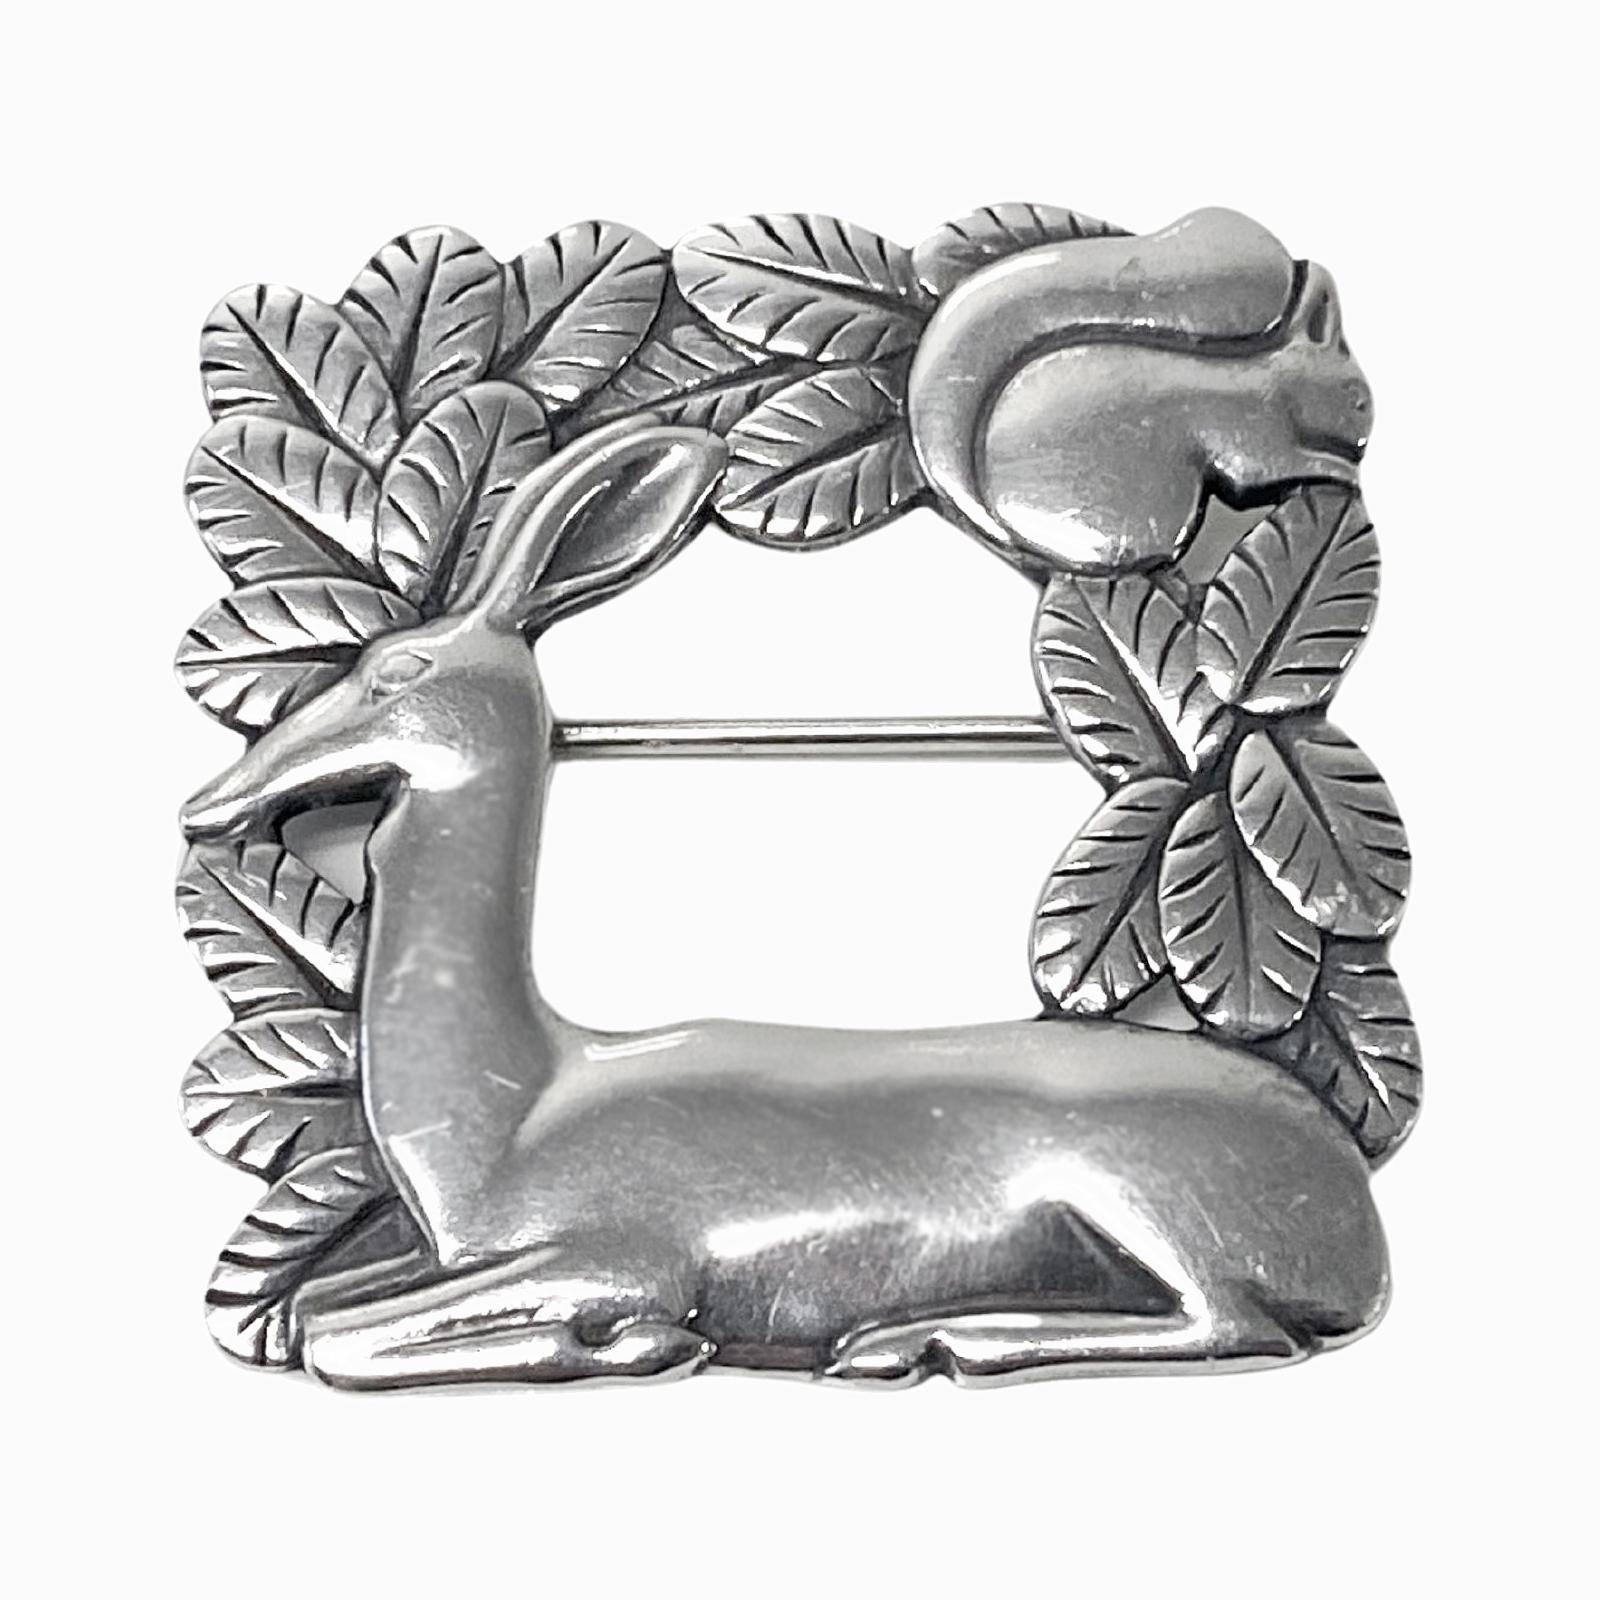 Georg Jensen Sterling Silver Deer and Squirrel Brooch #318 Vintage Sterling Silver, designed by Arno Malinowski. Intricately detailed, open-squared brooch featuring a deer resting with squirrel in foliage. Measures: 1.5 x 1.5 inches. Item Weight: